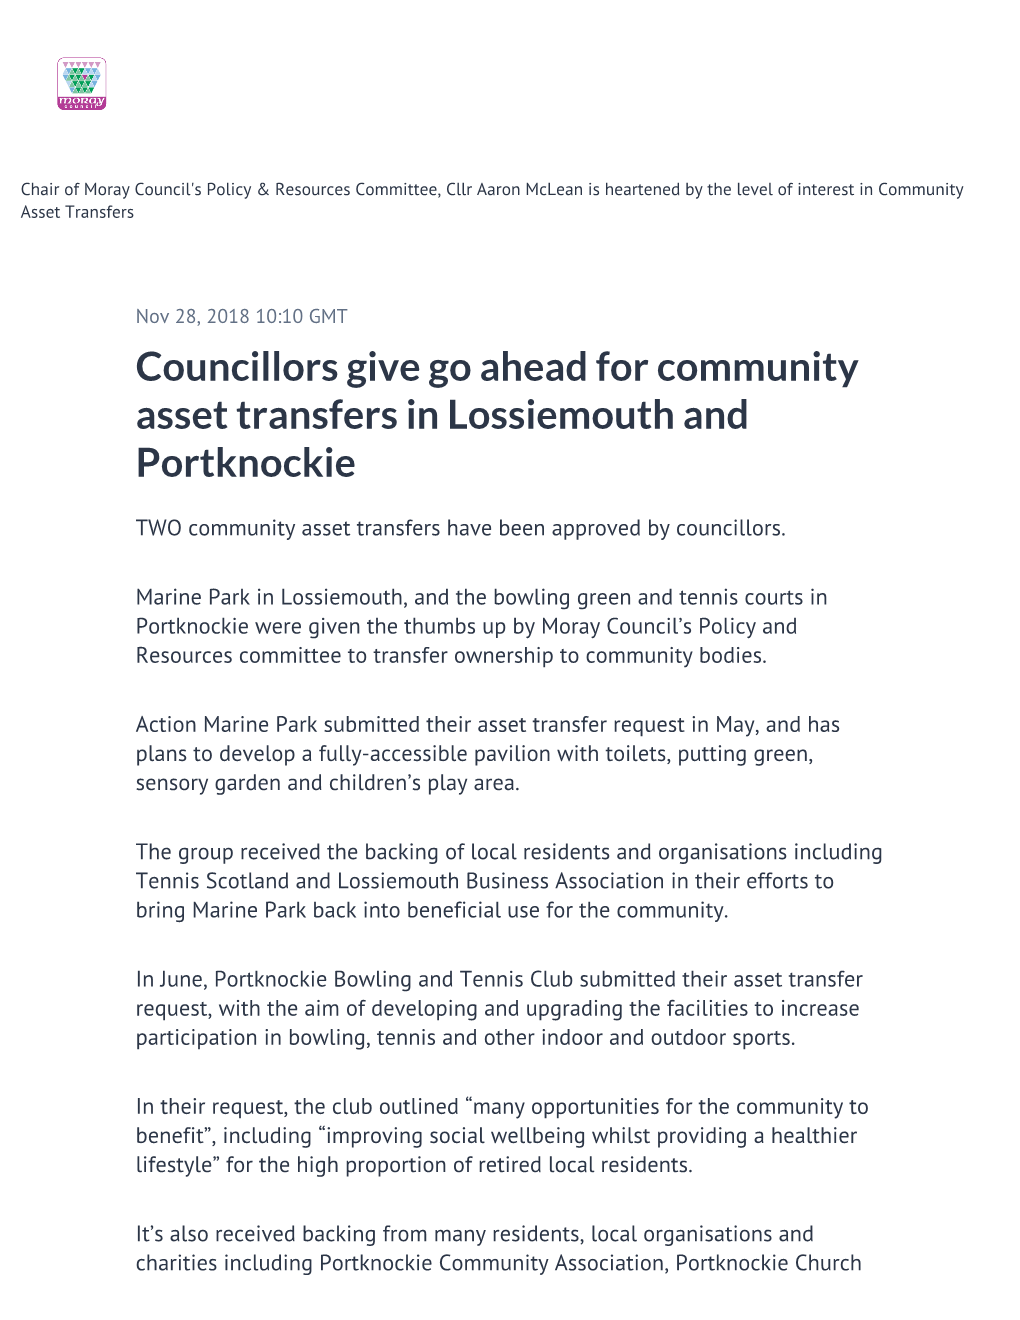 Councillors Give Go Ahead for Community Asset Transfers in Lossiemouth and Portknockie